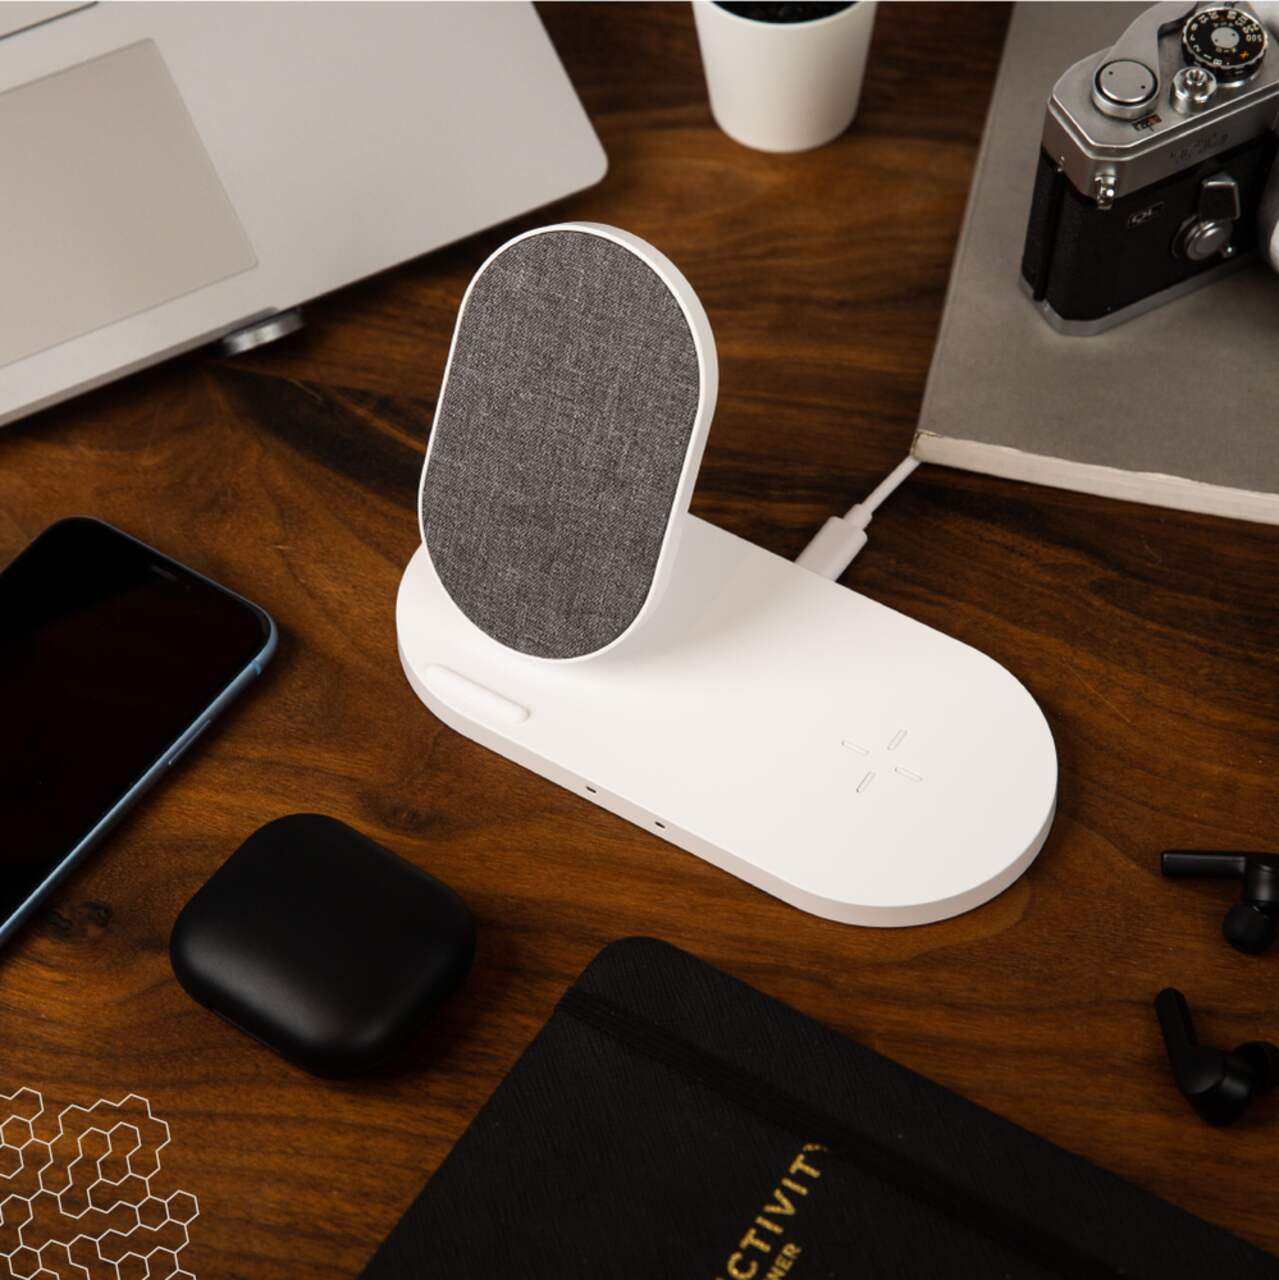 Bluehive Fabric Wierless Charging Pad, Compatible with Qi-Enabled